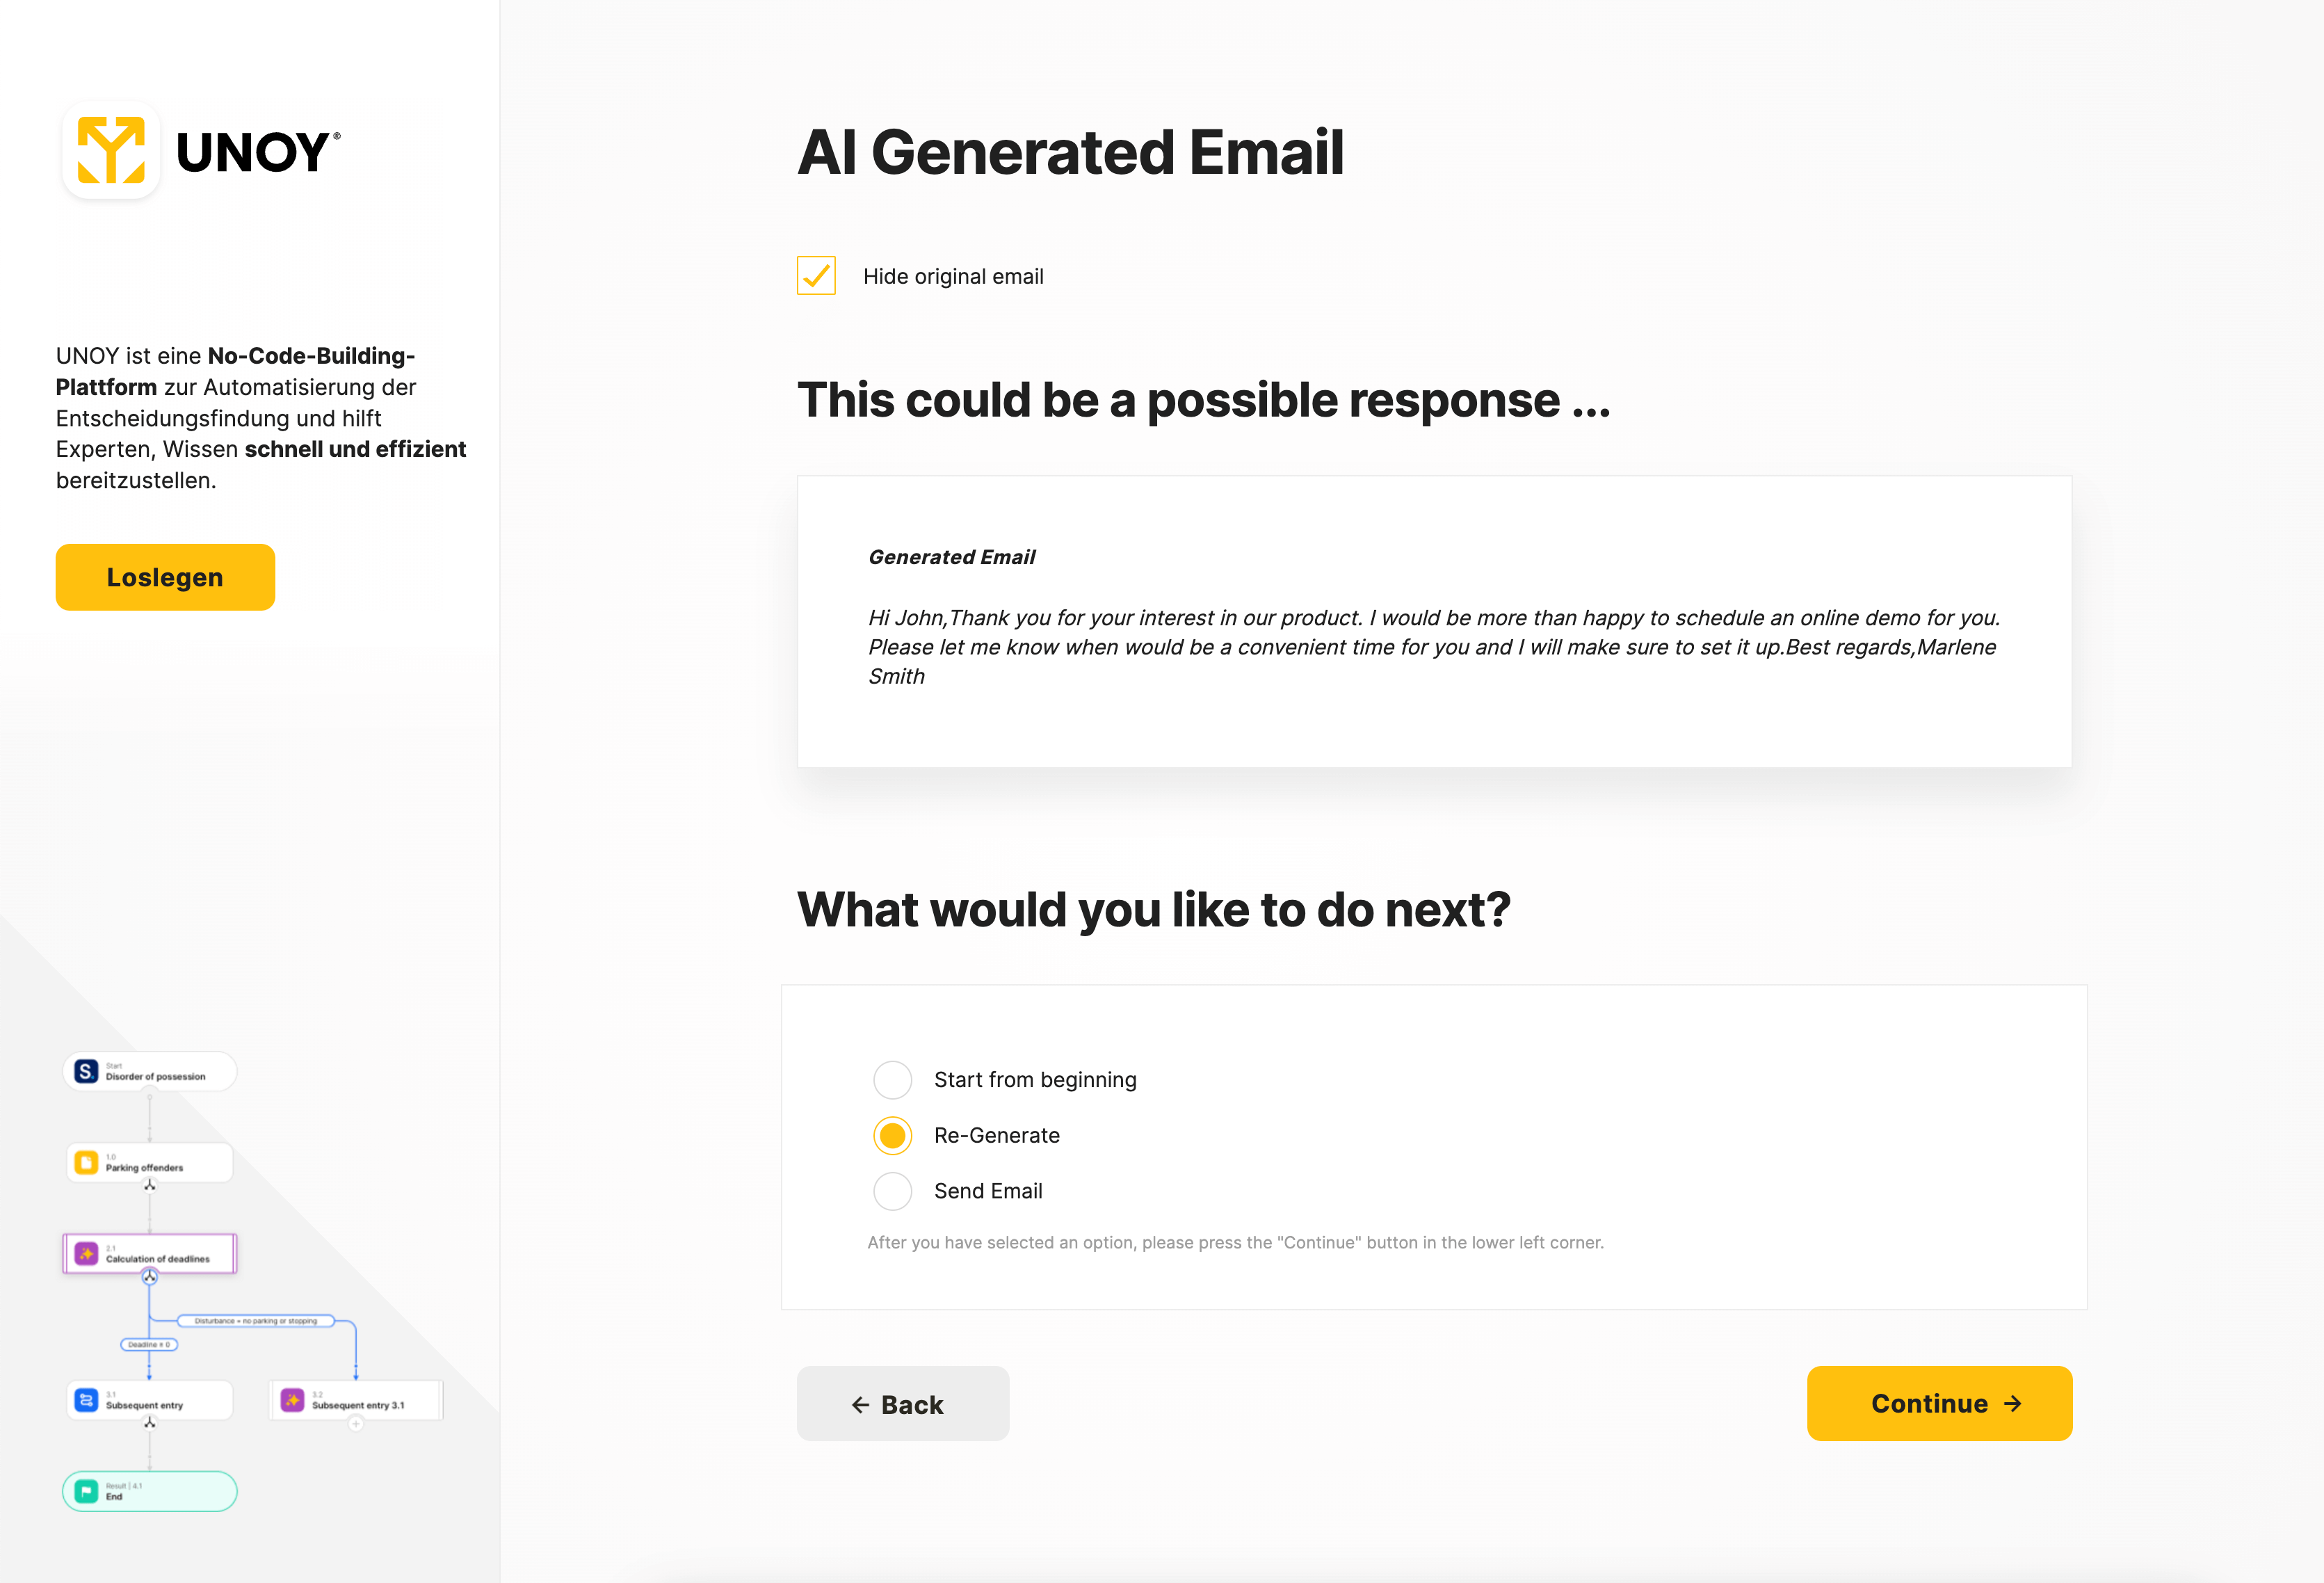 UNOY AI-Email-Response